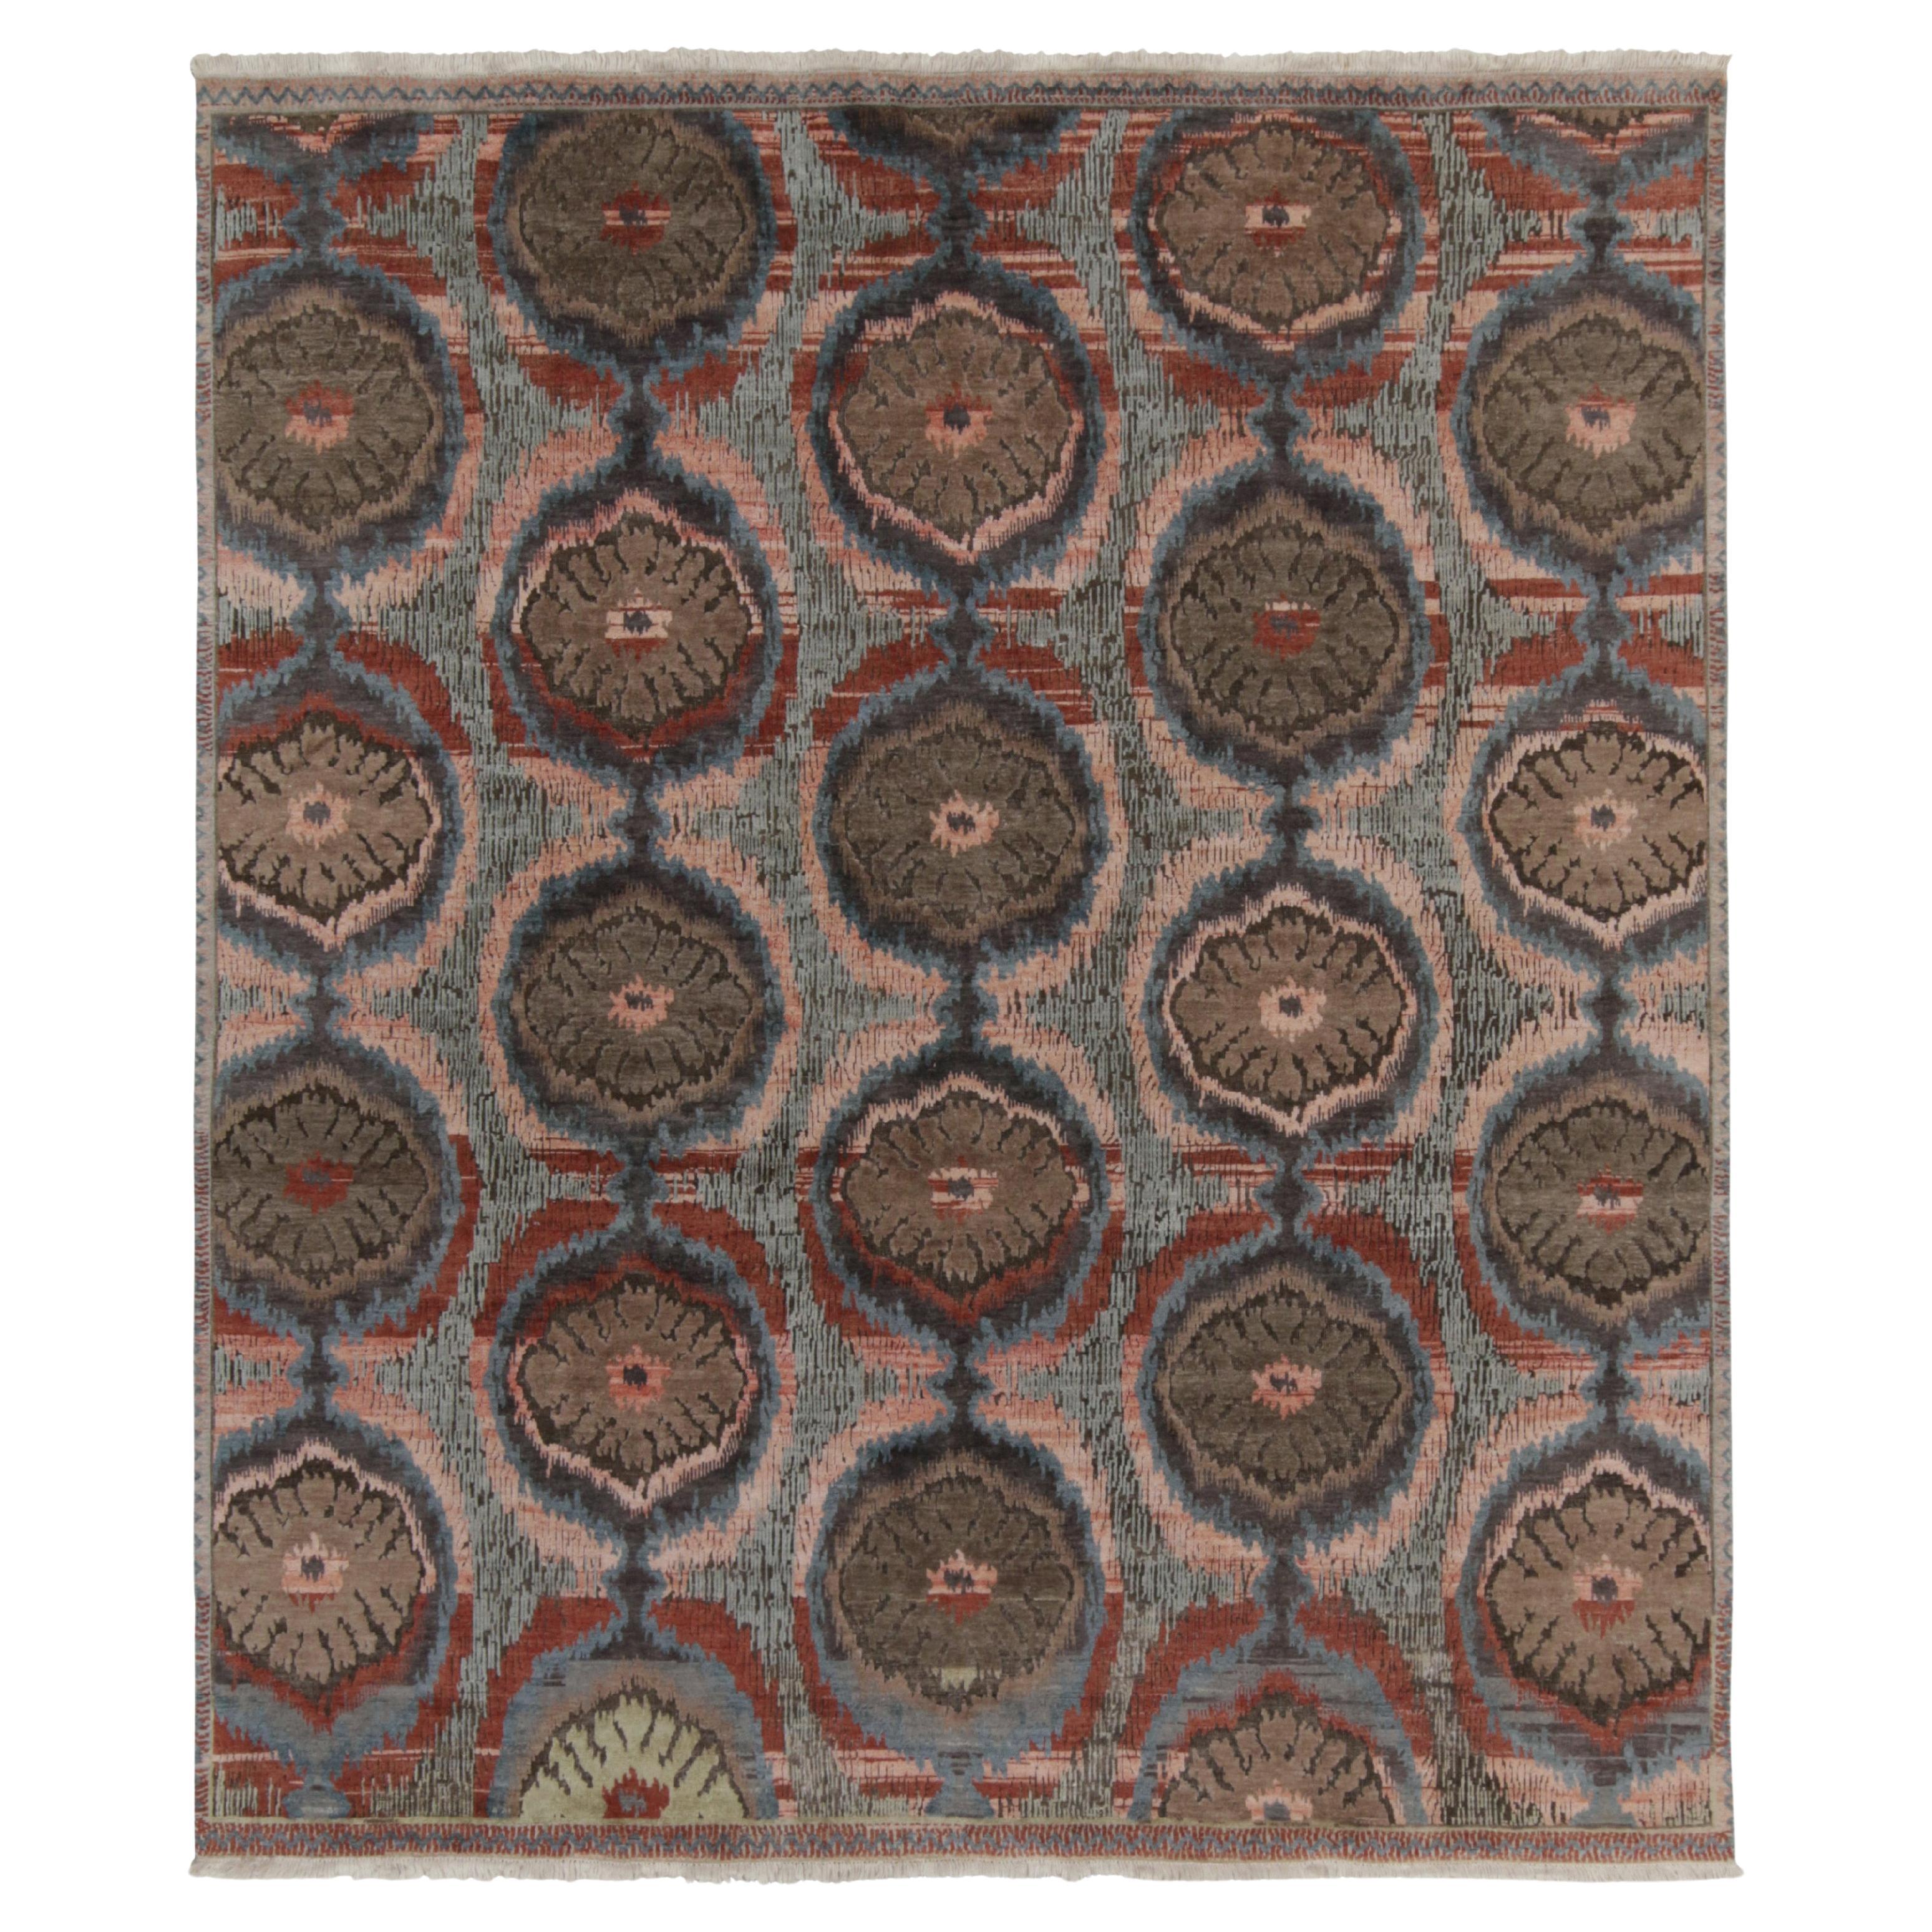 Rug & Kilim’s Classic-Style Rug in Pink, Blue and Beige-Brown Ikats Patterns